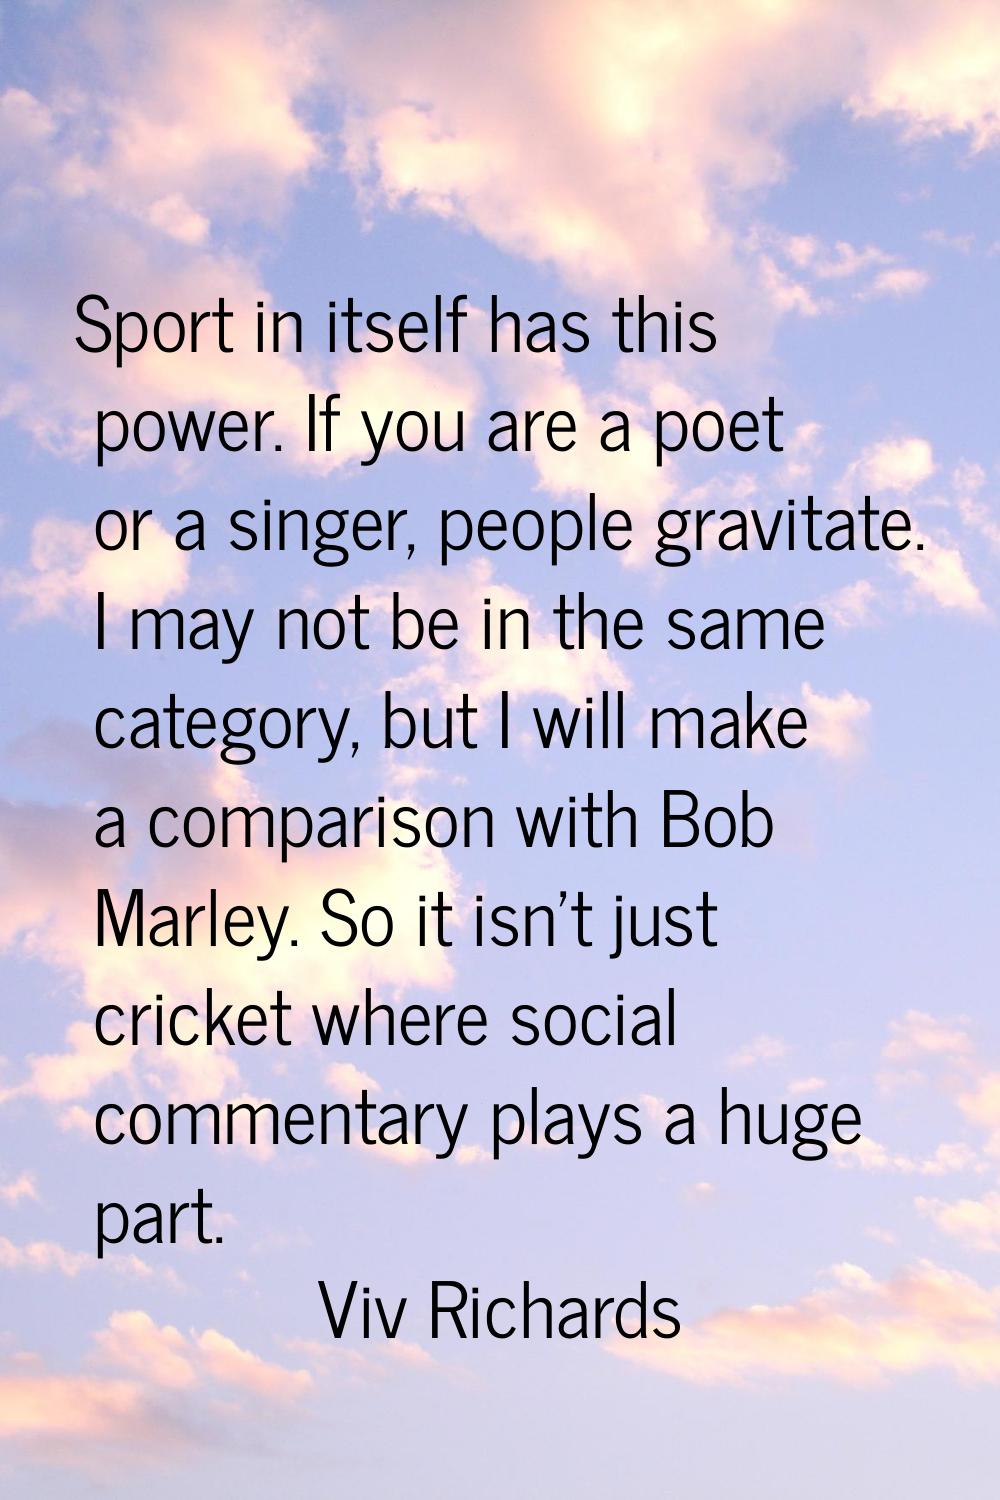 Sport in itself has this power. If you are a poet or a singer, people gravitate. I may not be in th